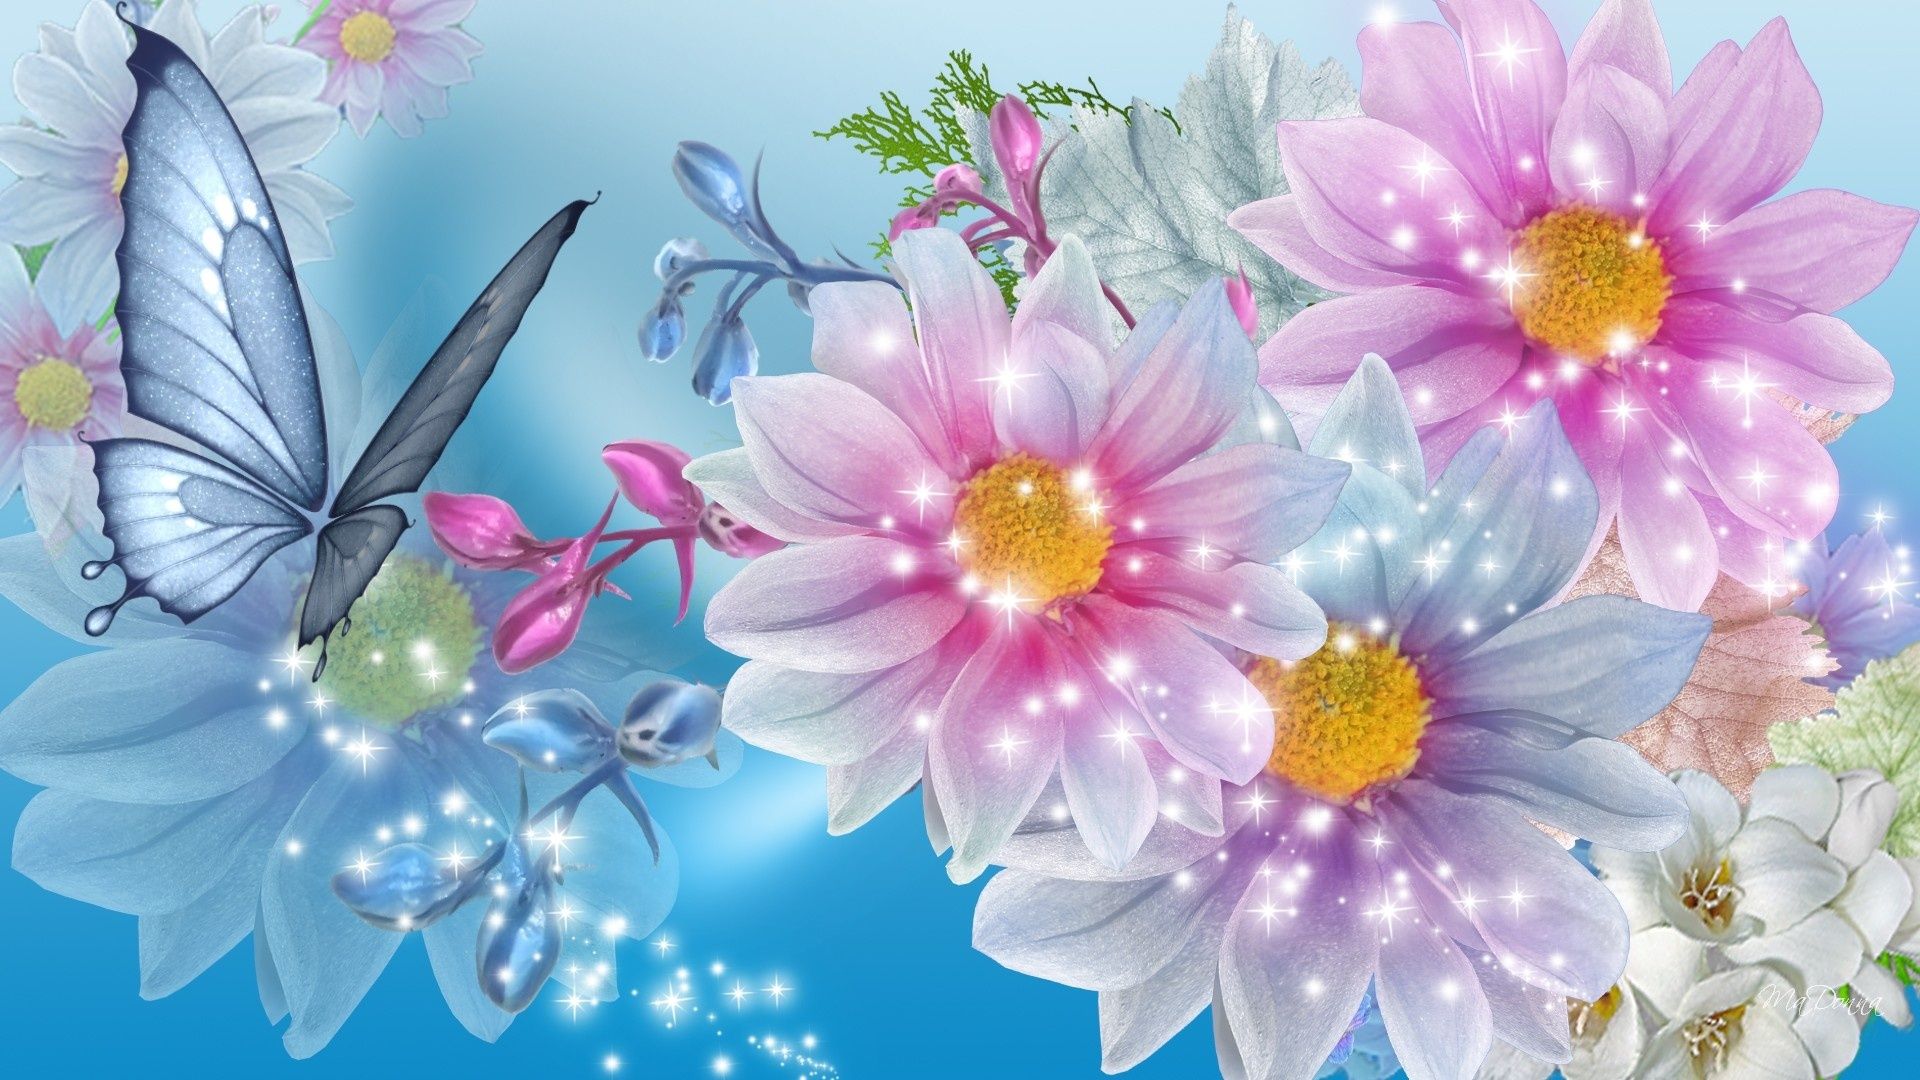 477 Flower HD Wallpapers | Backgrounds - Wallpaper Abyss